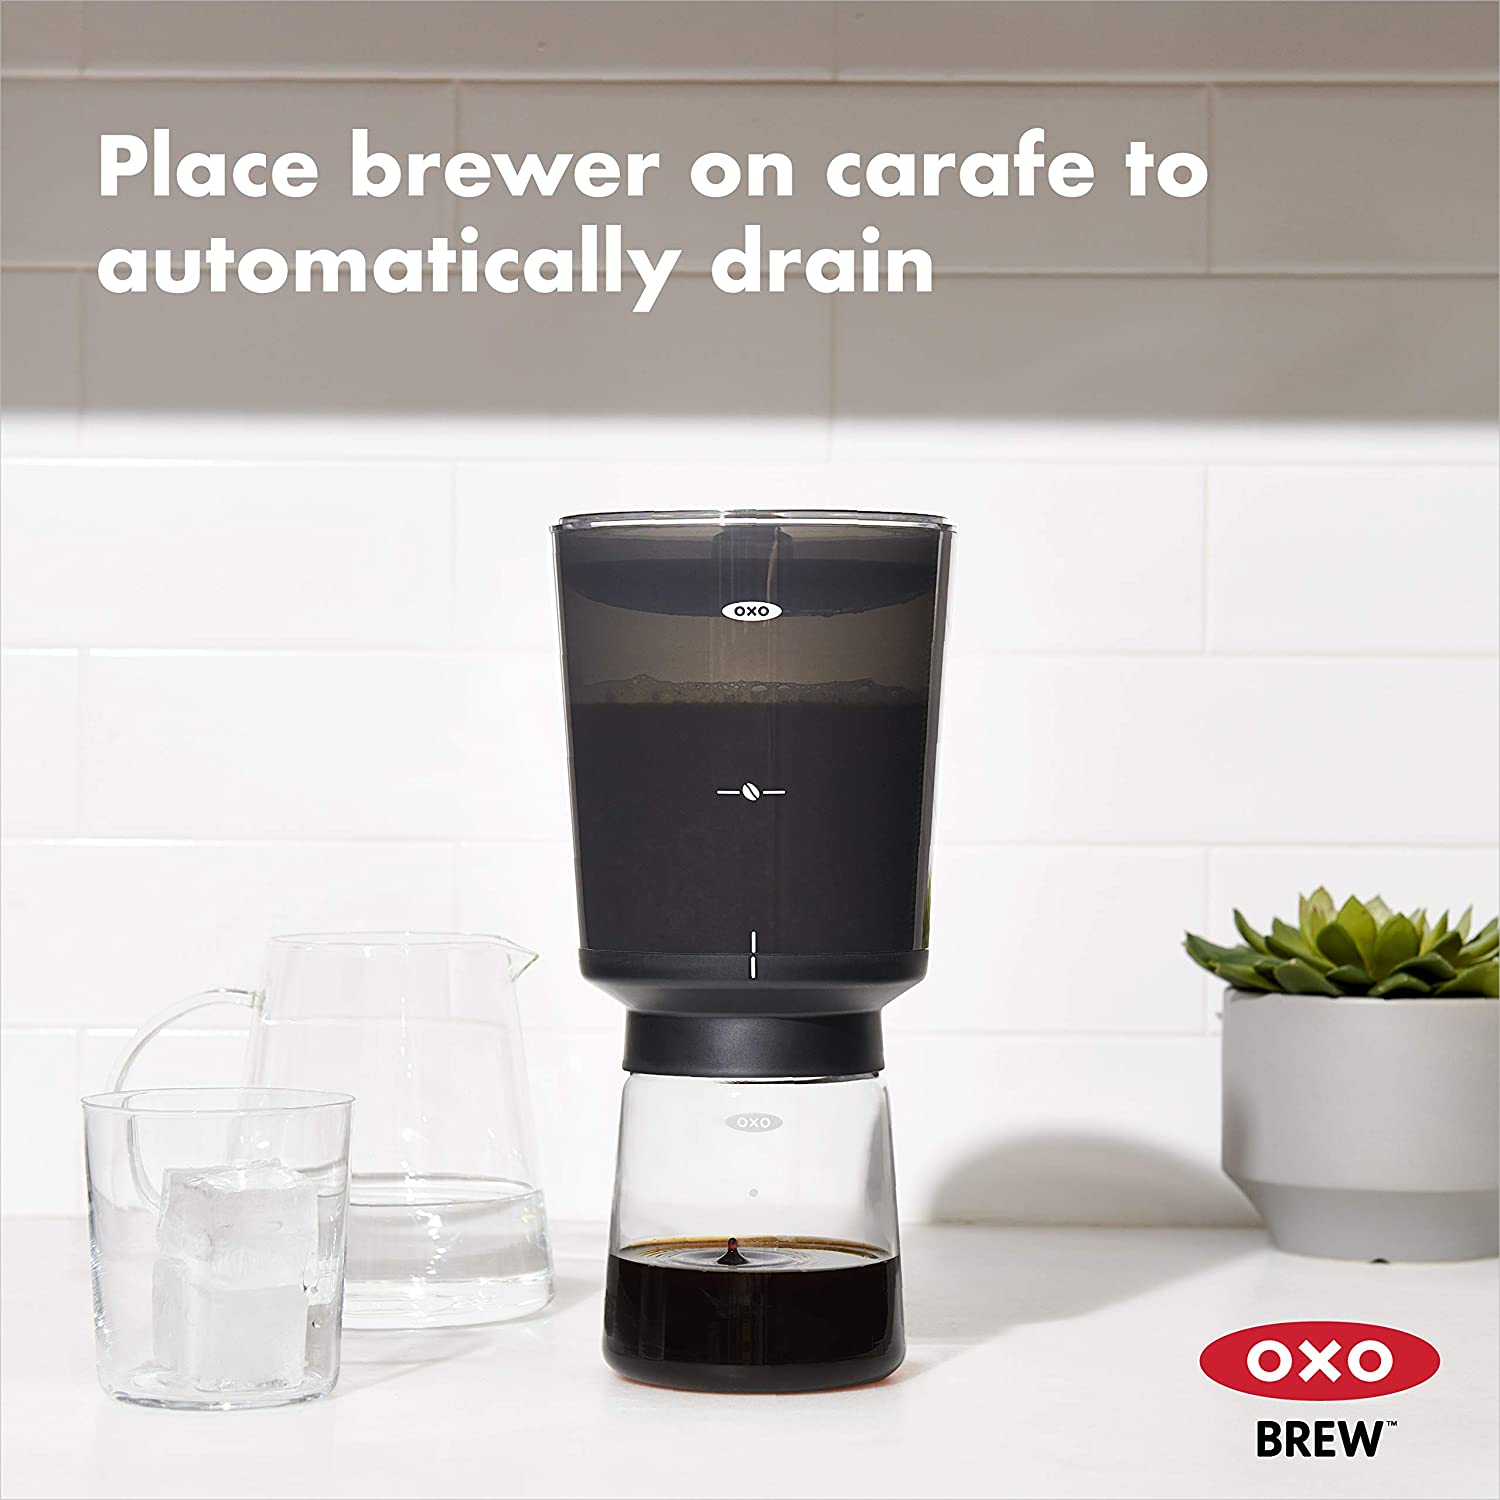 OXO Brew Compact Cold Brew Coffee Maker (New)